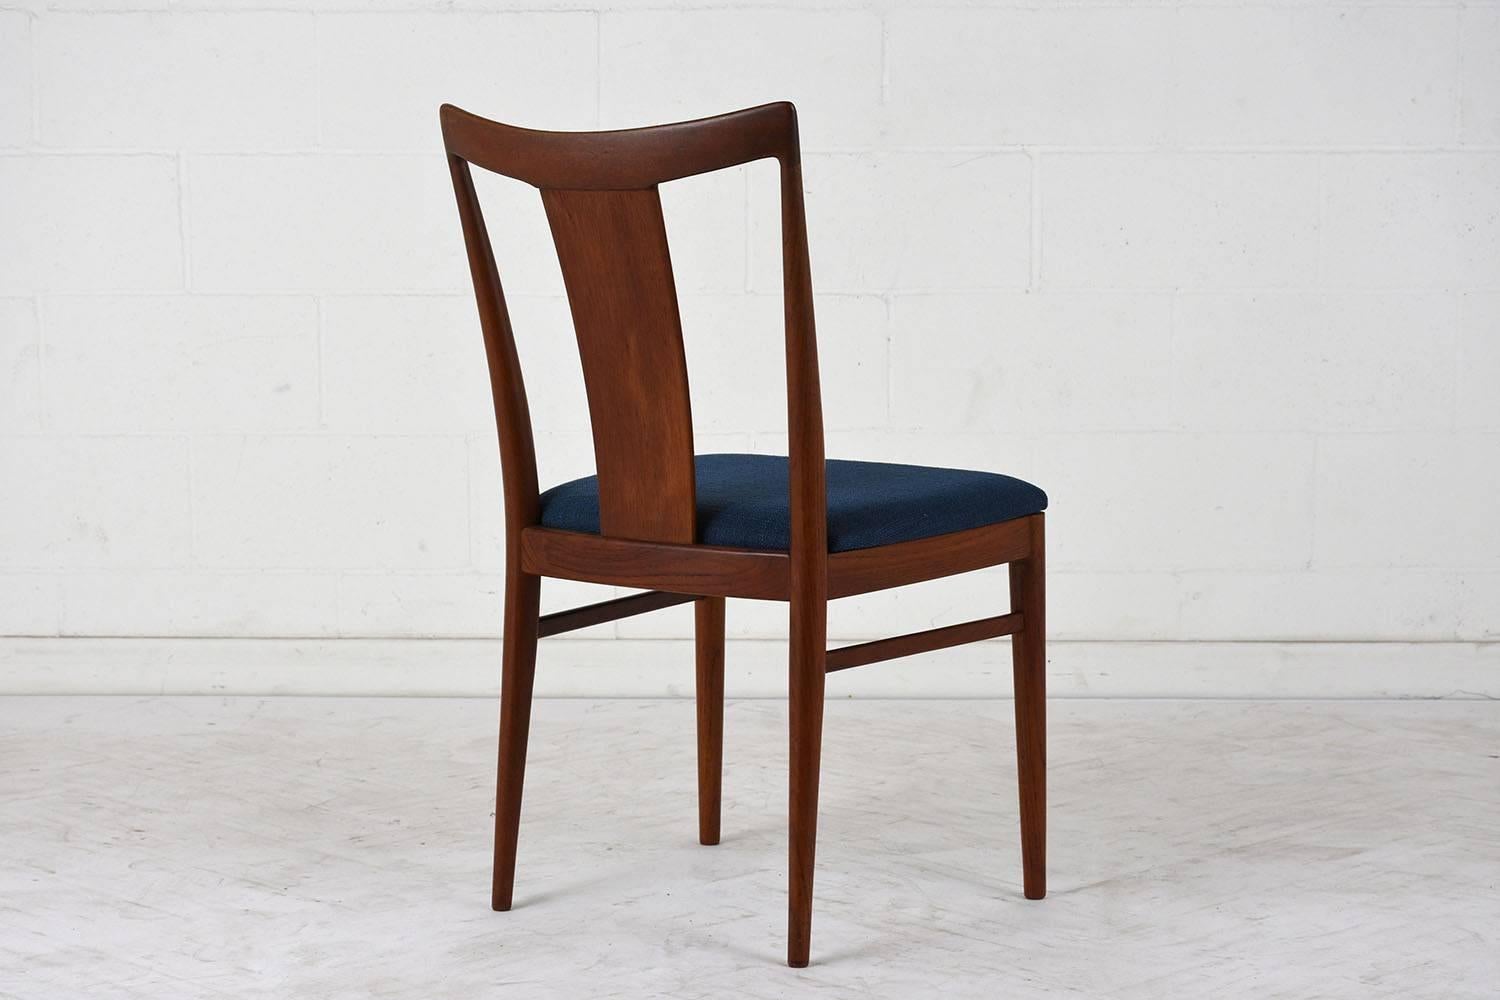 This set of six 1960s Danish Mid-Century Modern style dining chairs are designed by Rasmus Solberg. The teak wood frames have been stained a dark walnut color with a lacquered finish. The seat backs are curved with a large splat in the centre and